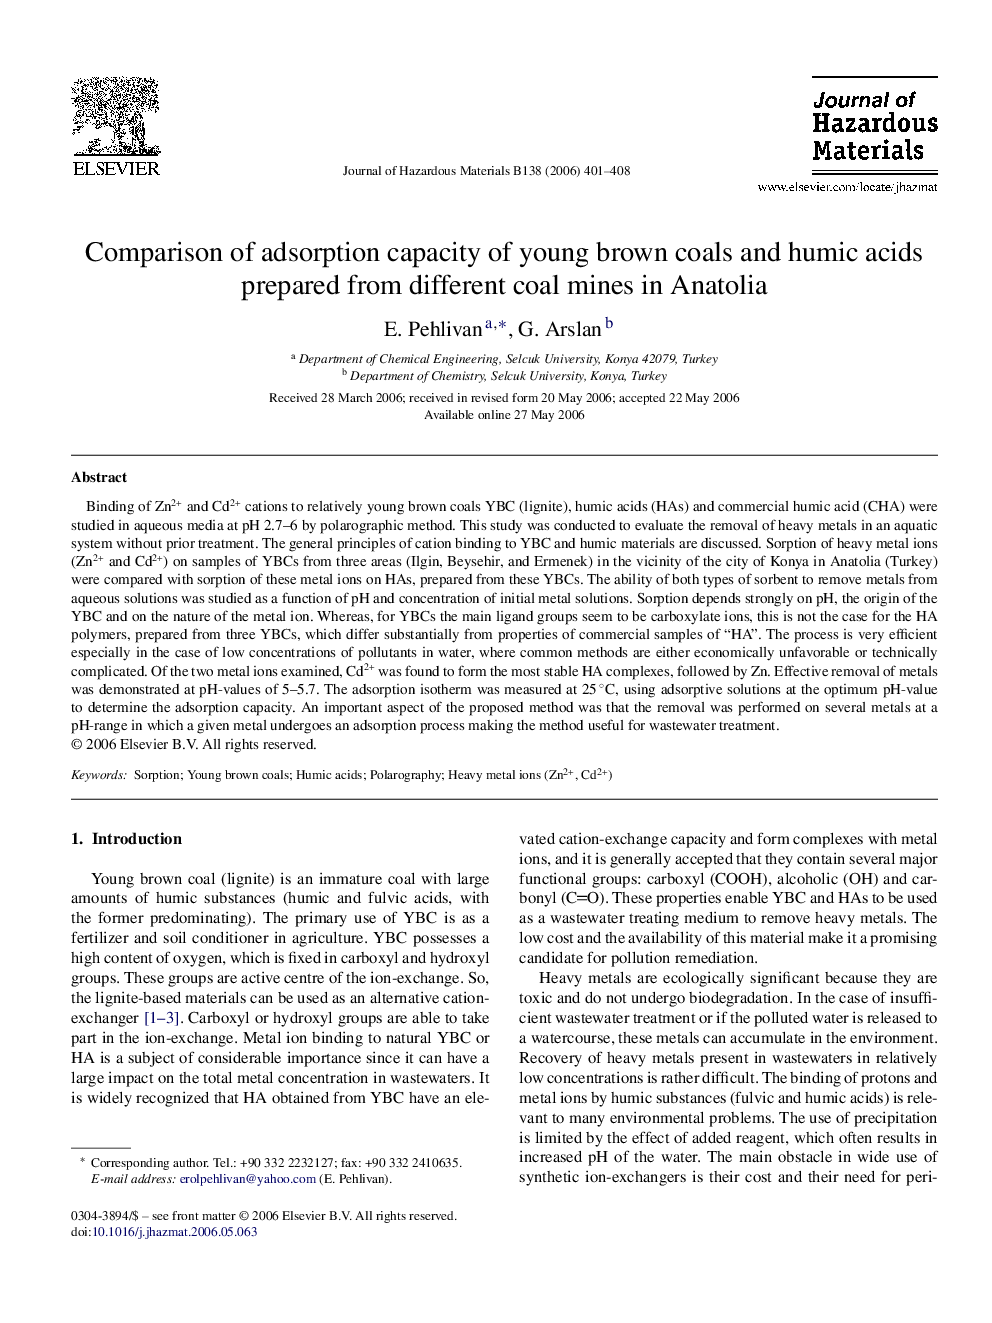 Comparison of adsorption capacity of young brown coals and humic acids prepared from different coal mines in Anatolia